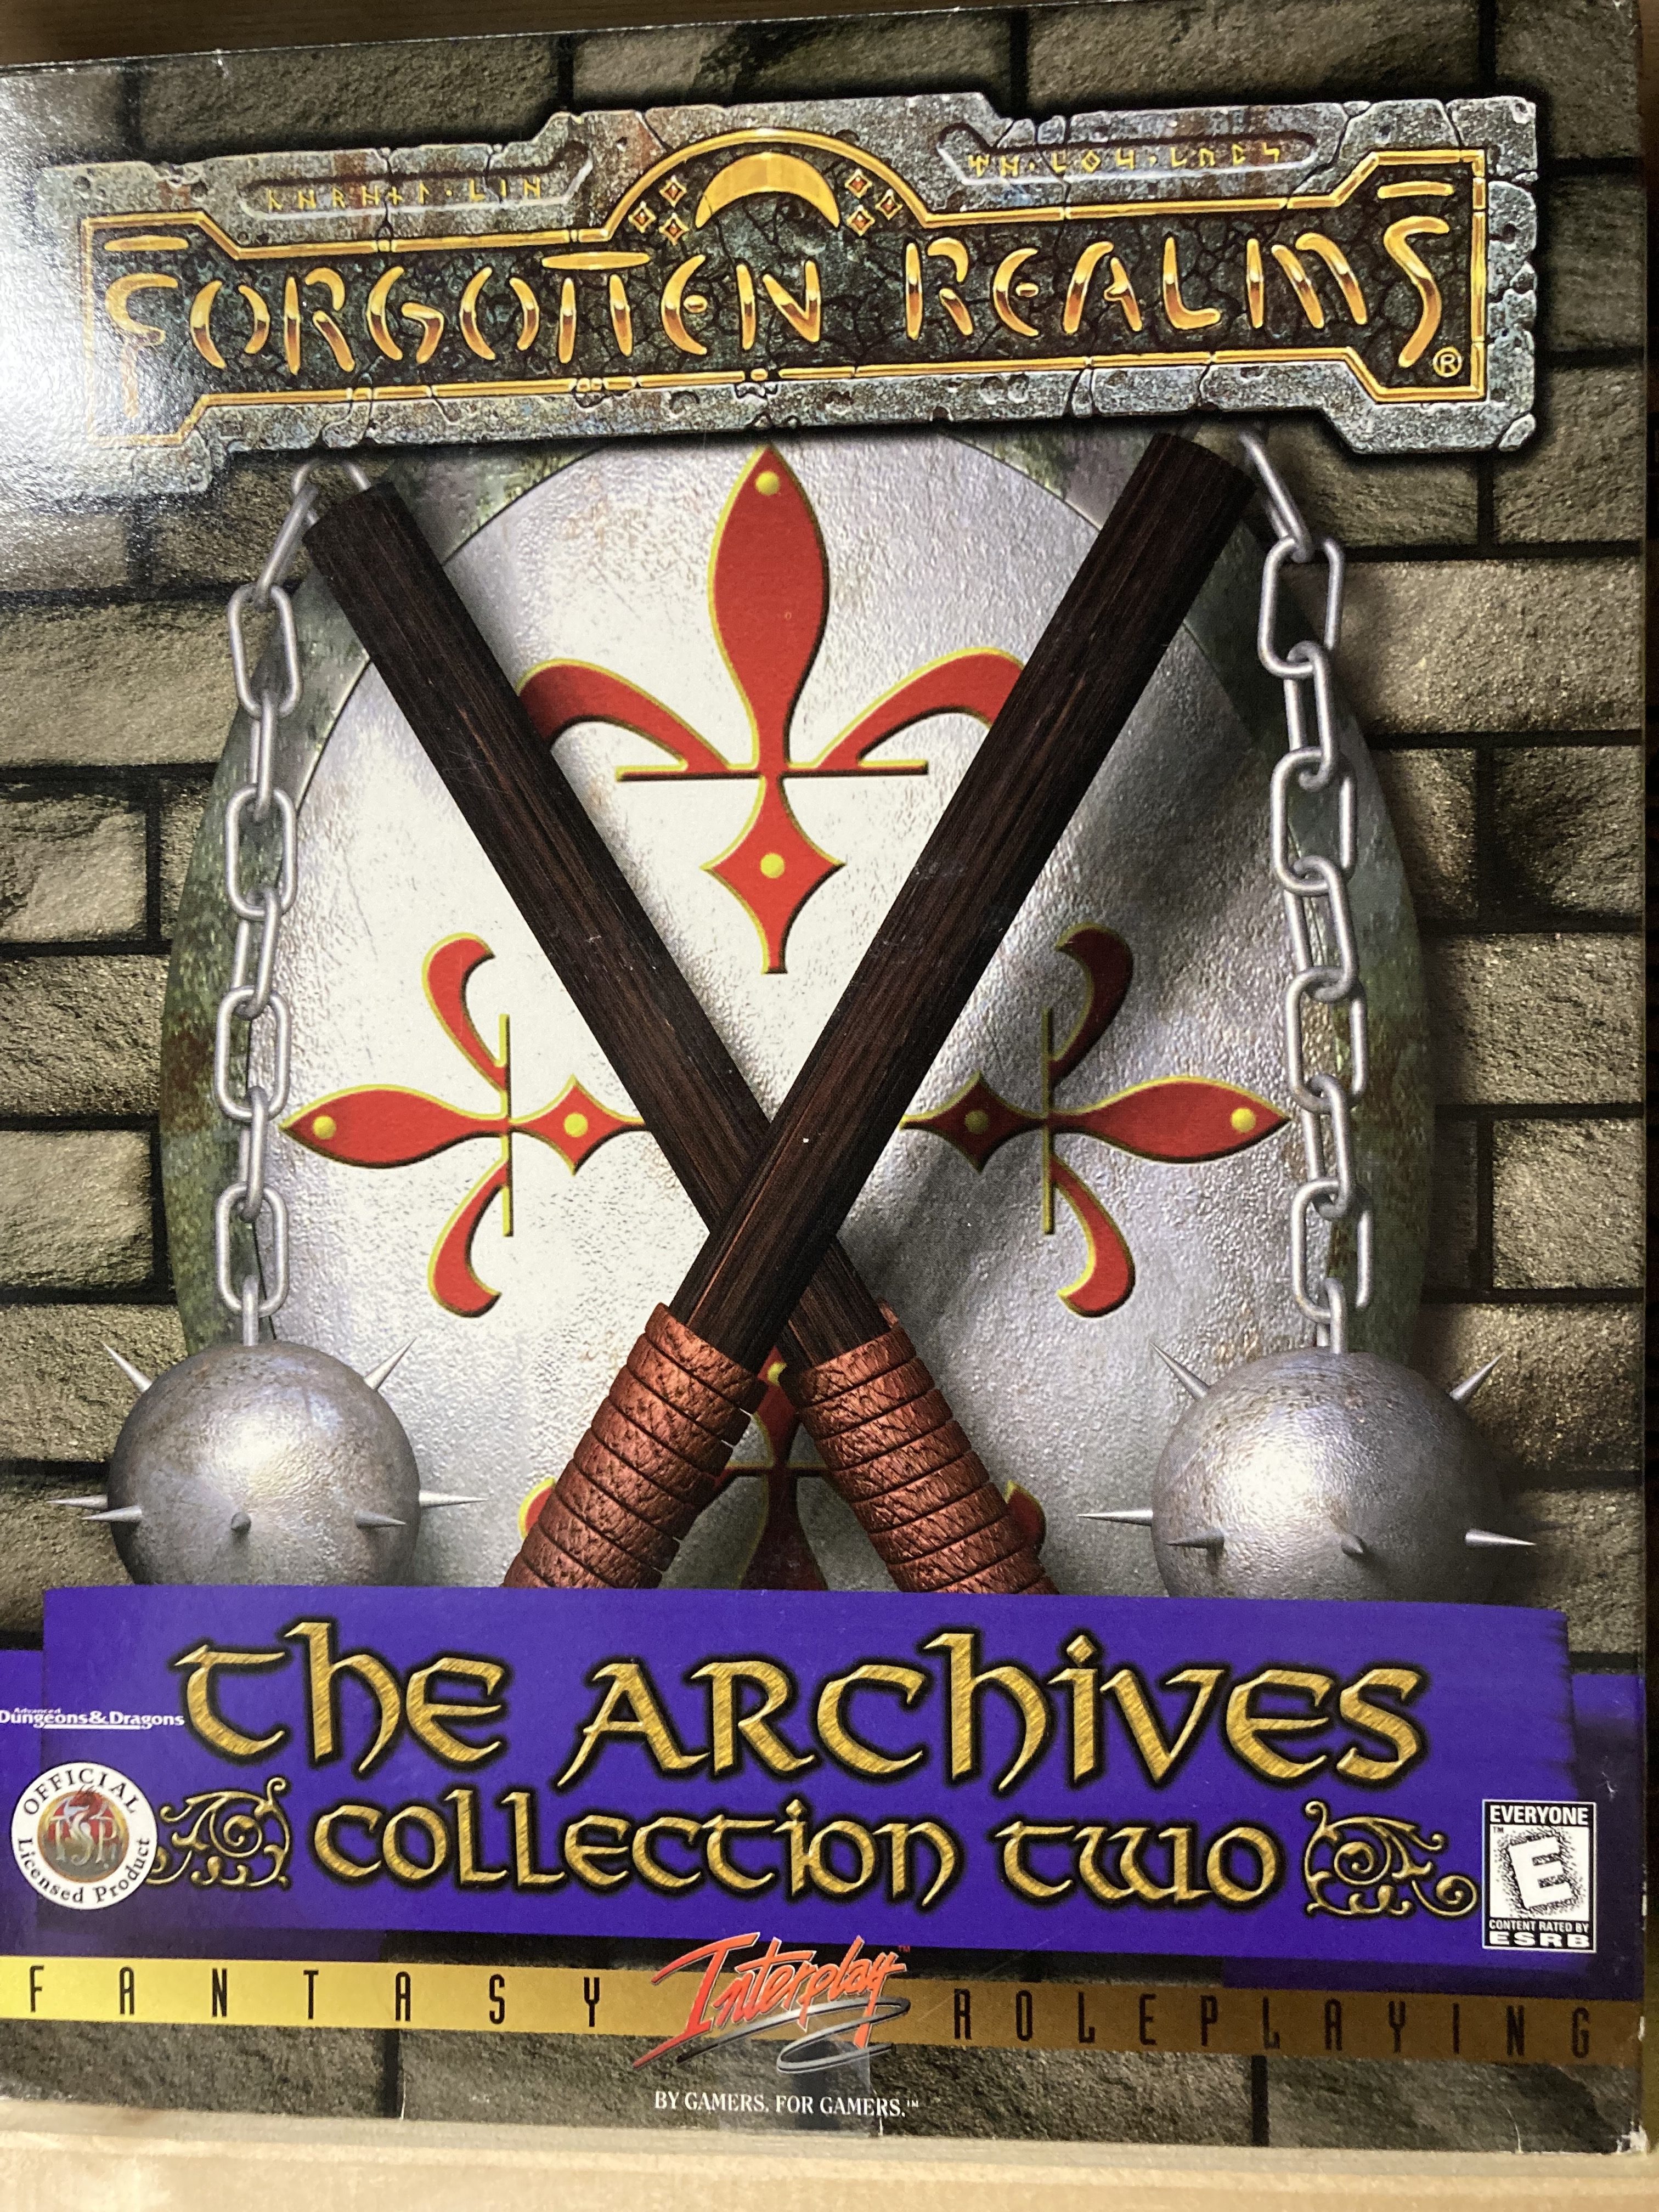 Unlimited adventures. Forgotten Realms игра. Forgotten Realms: Unlimited Adventures. The Forgotten Realms Archives. Forgotten Realms: the Archives - collection two.